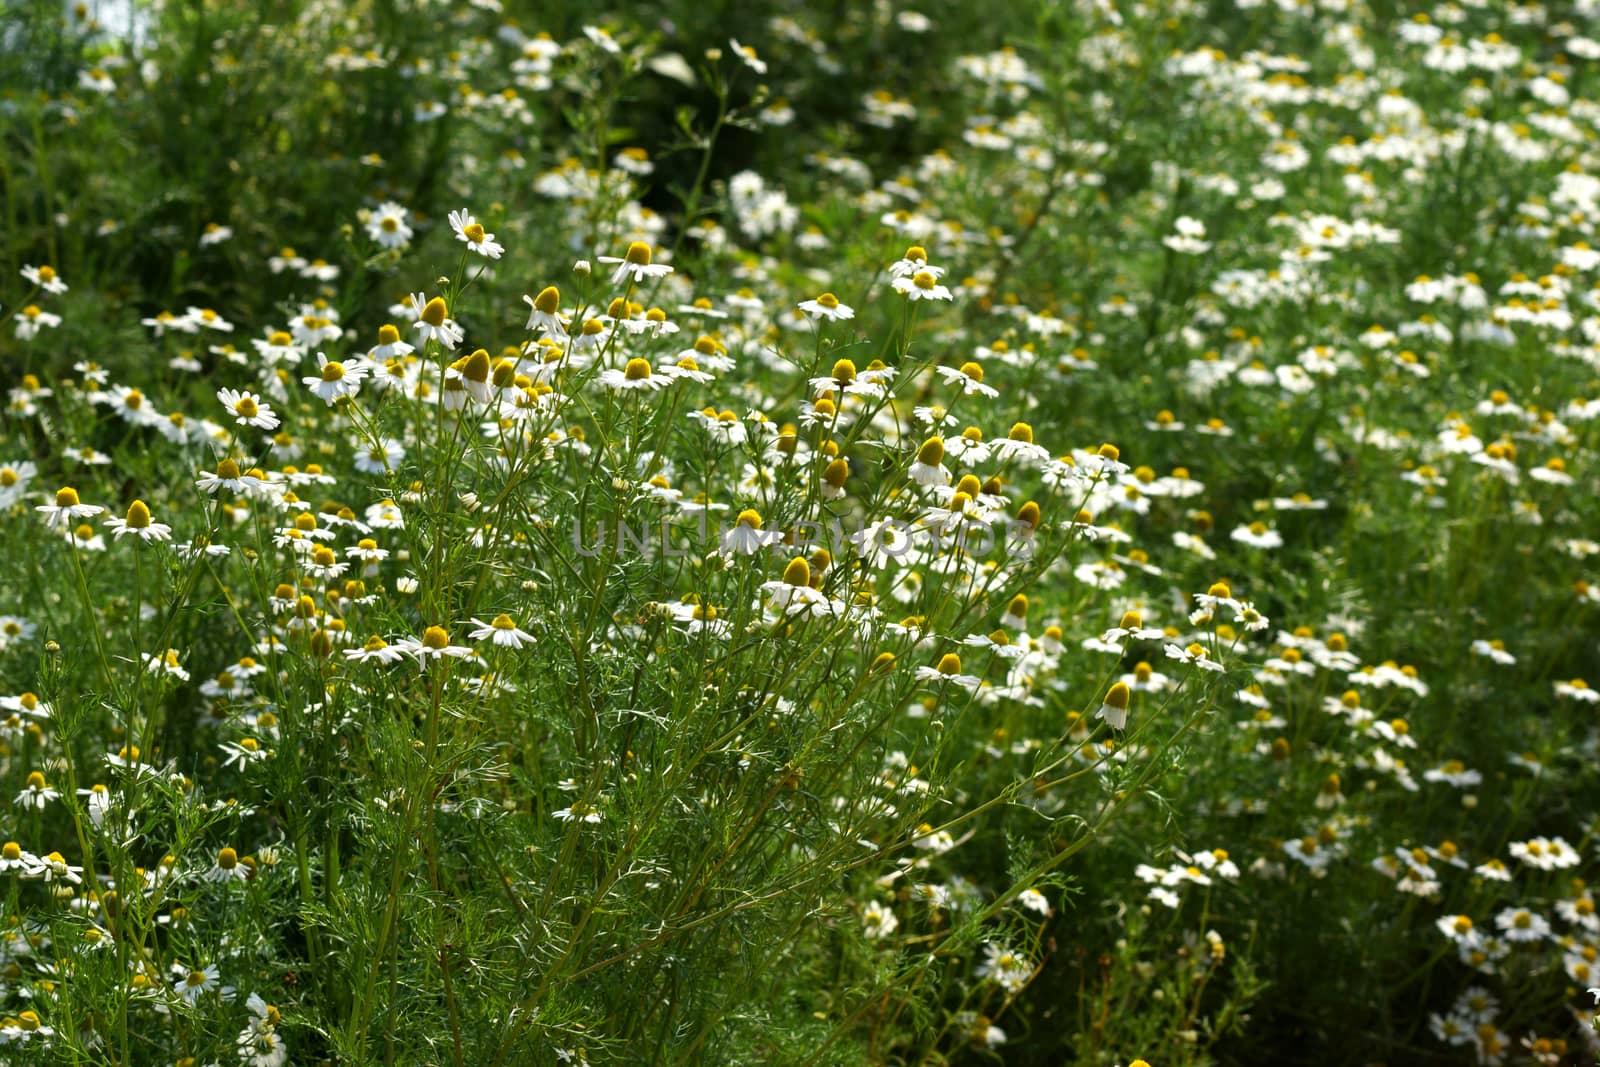 Chamomile flowers on the walkway in the vegetable garden.